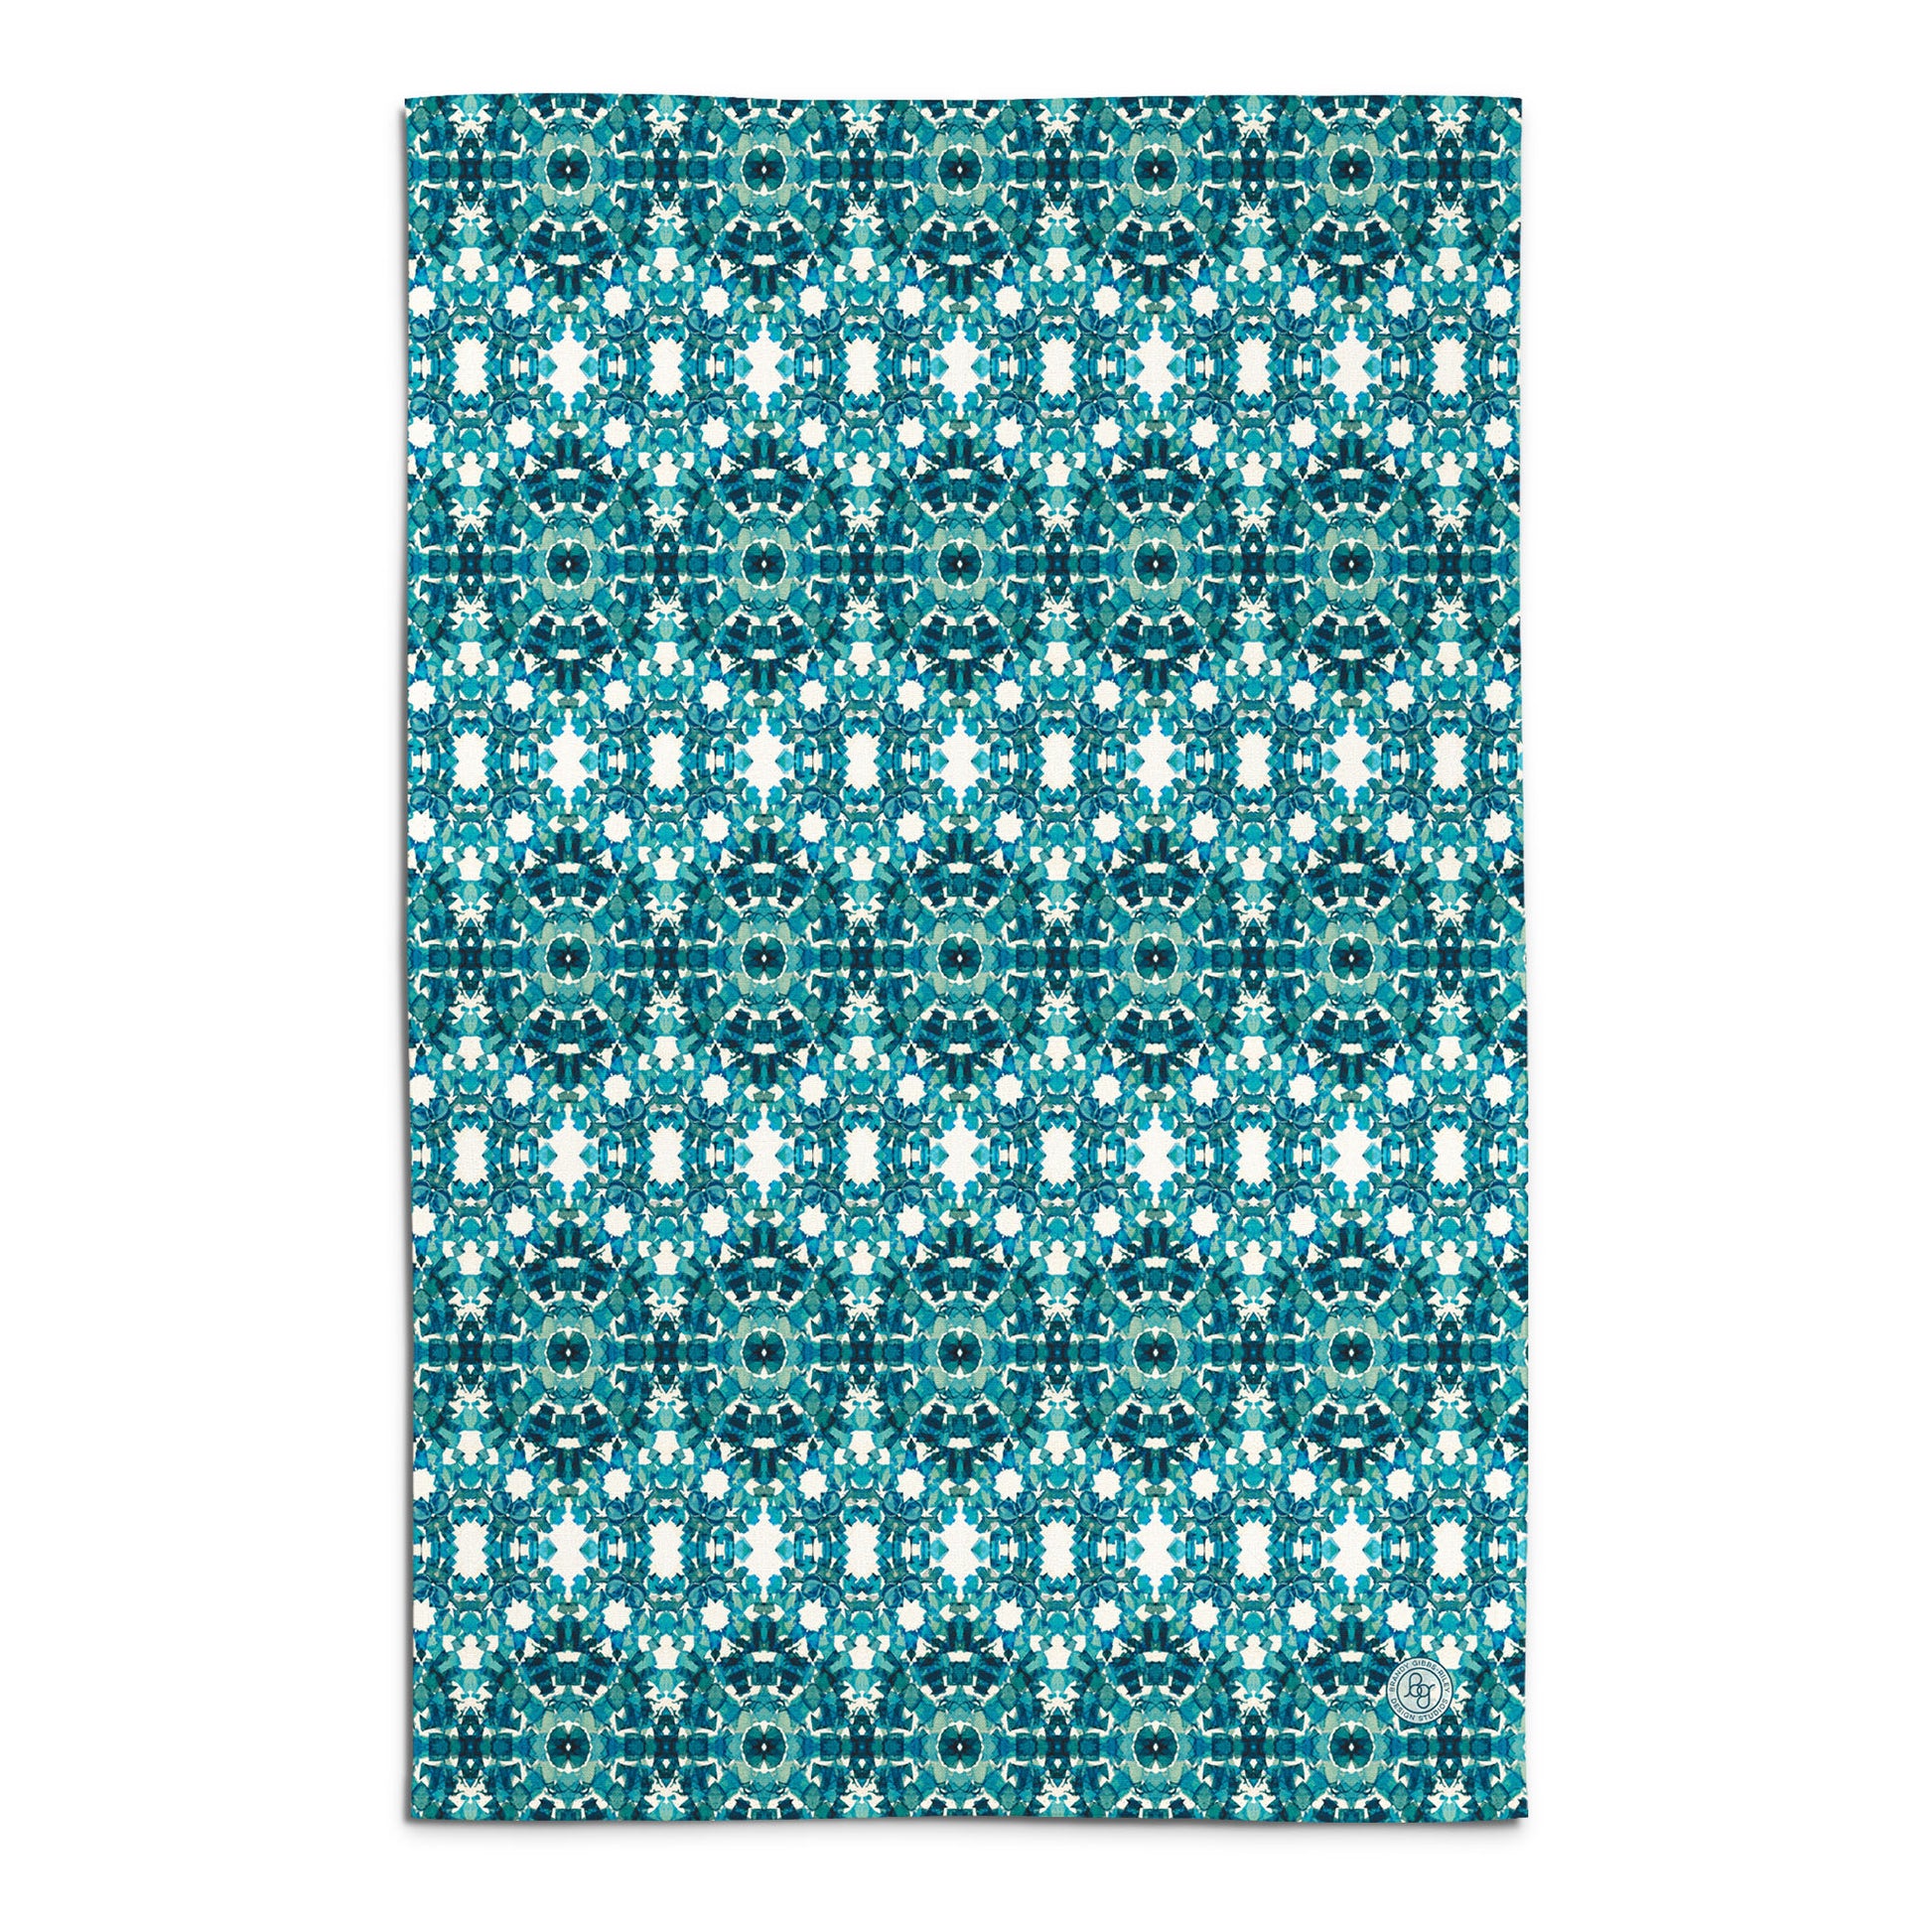 Flour sack tea towel featuring an abstract teal hand-painted pattern